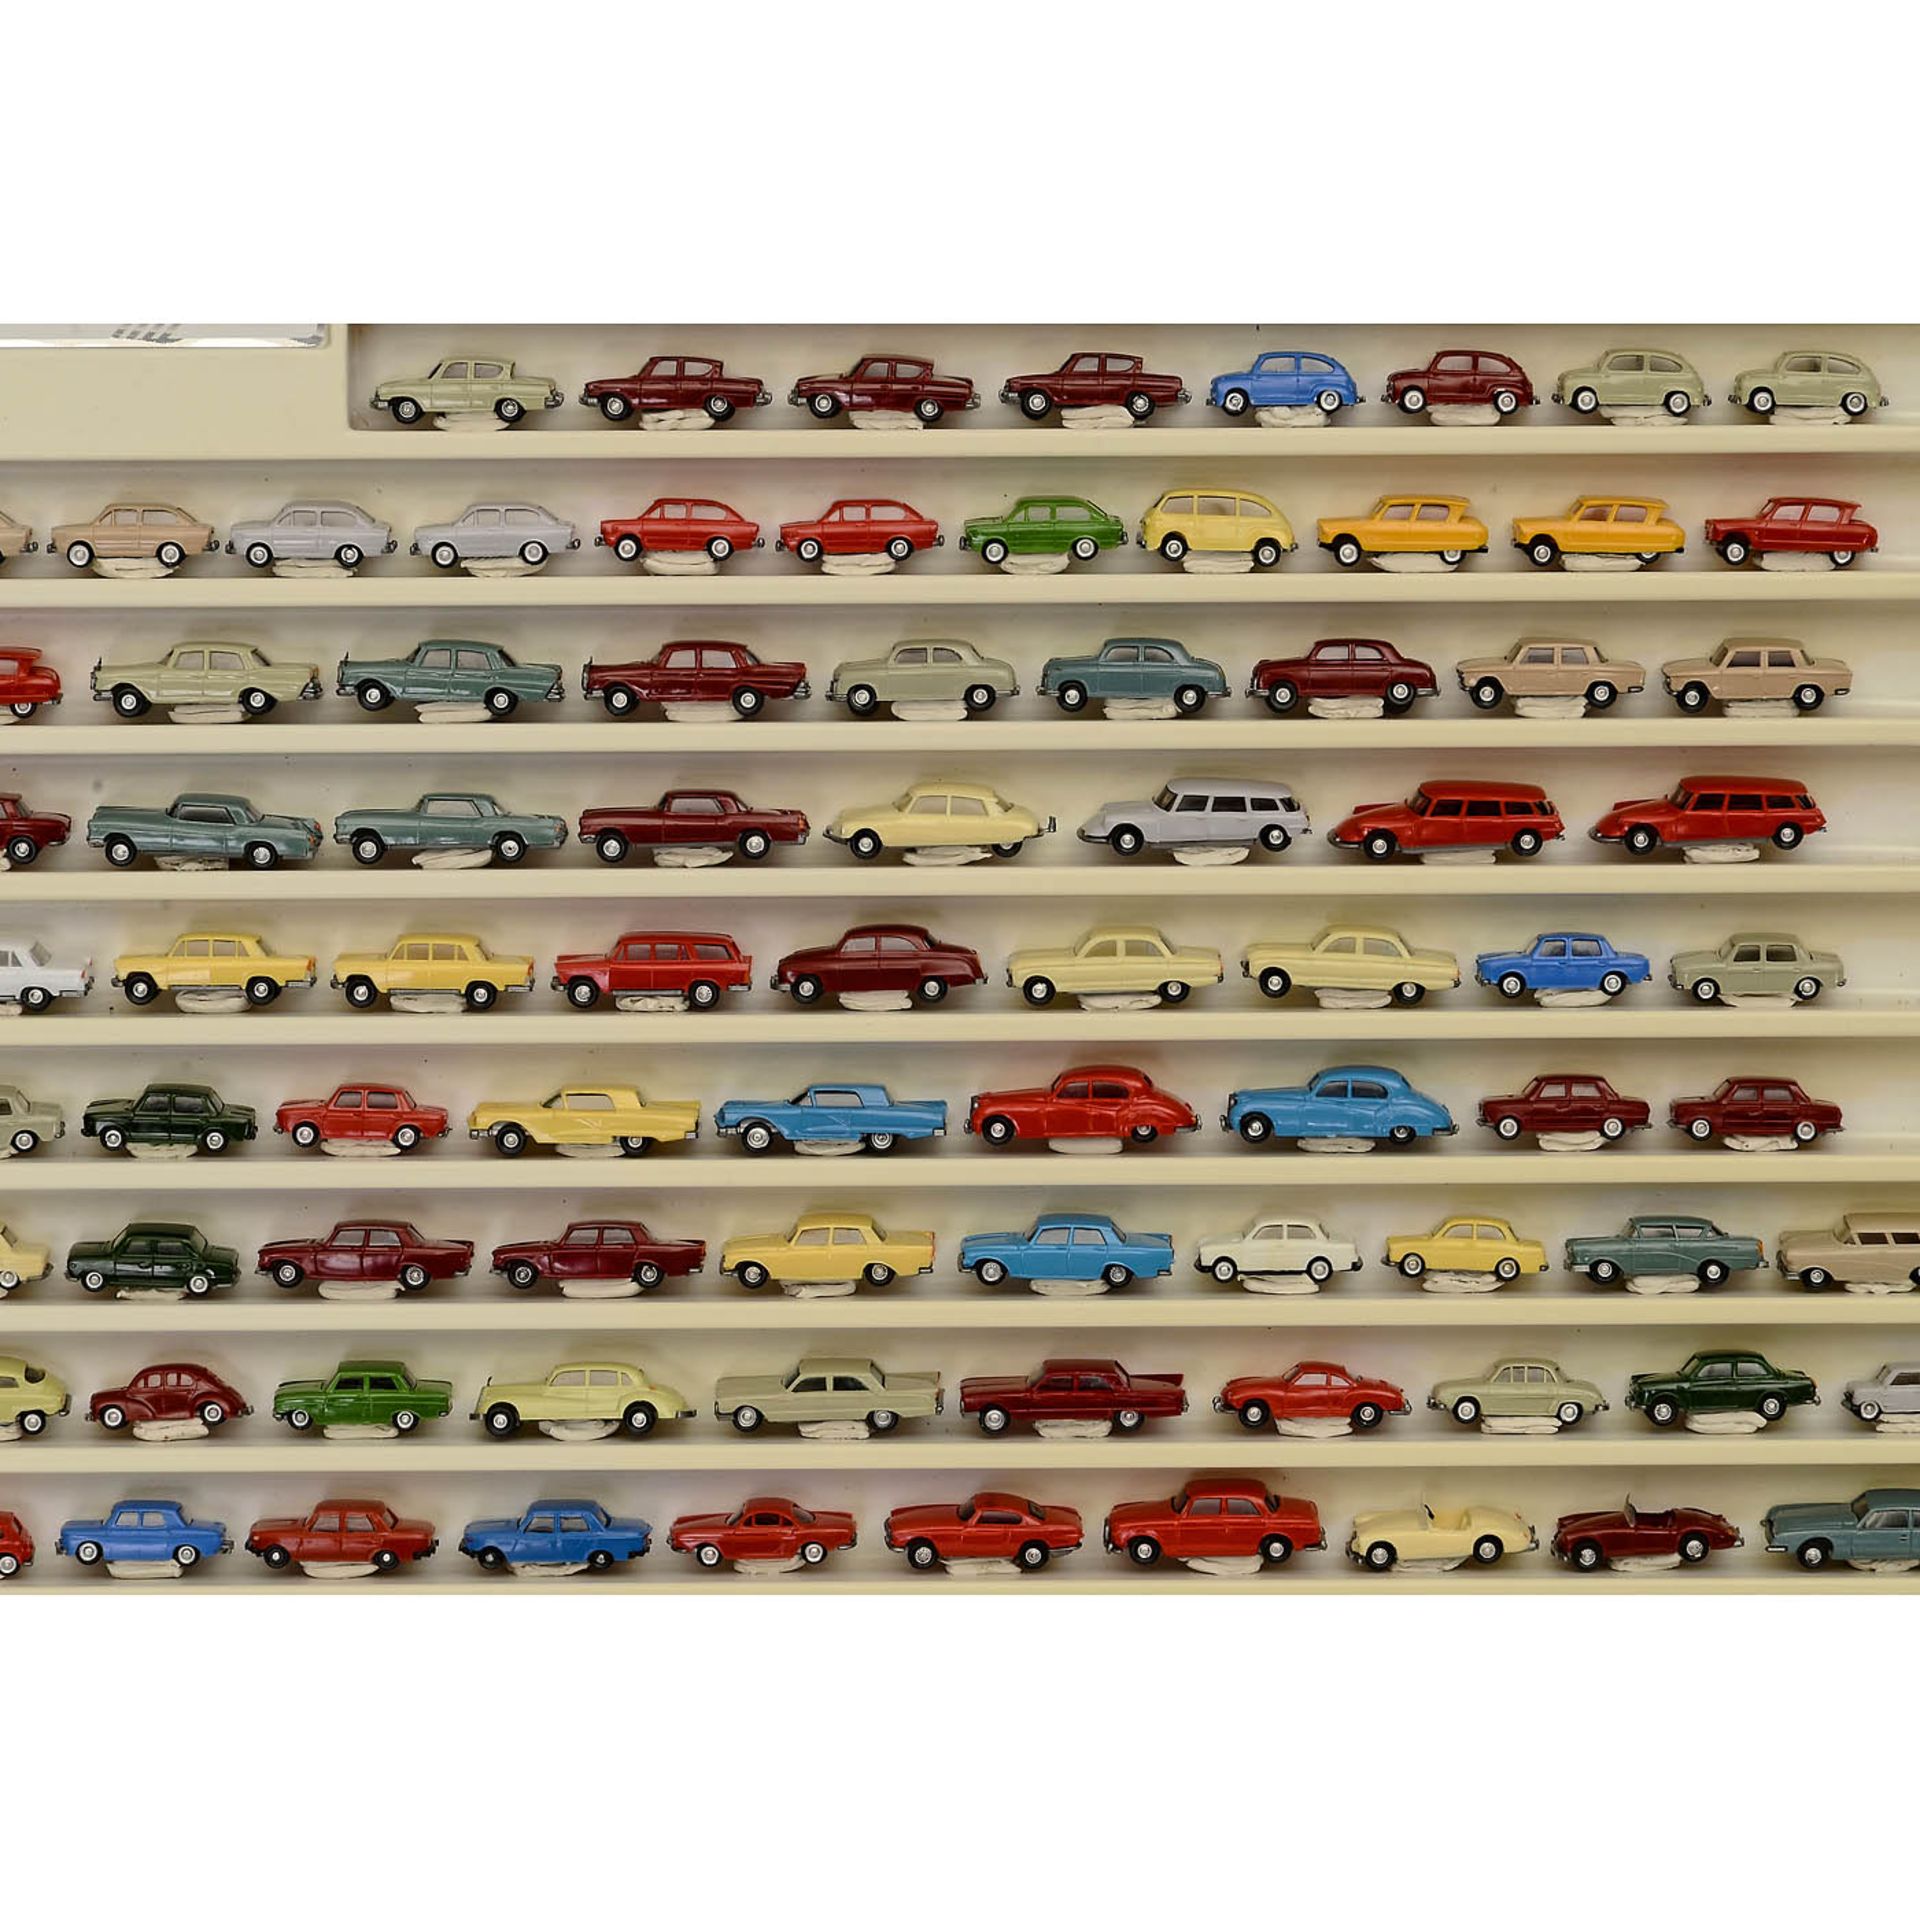 Large Collection of 1:87 Scale Model Cars - Image 3 of 9